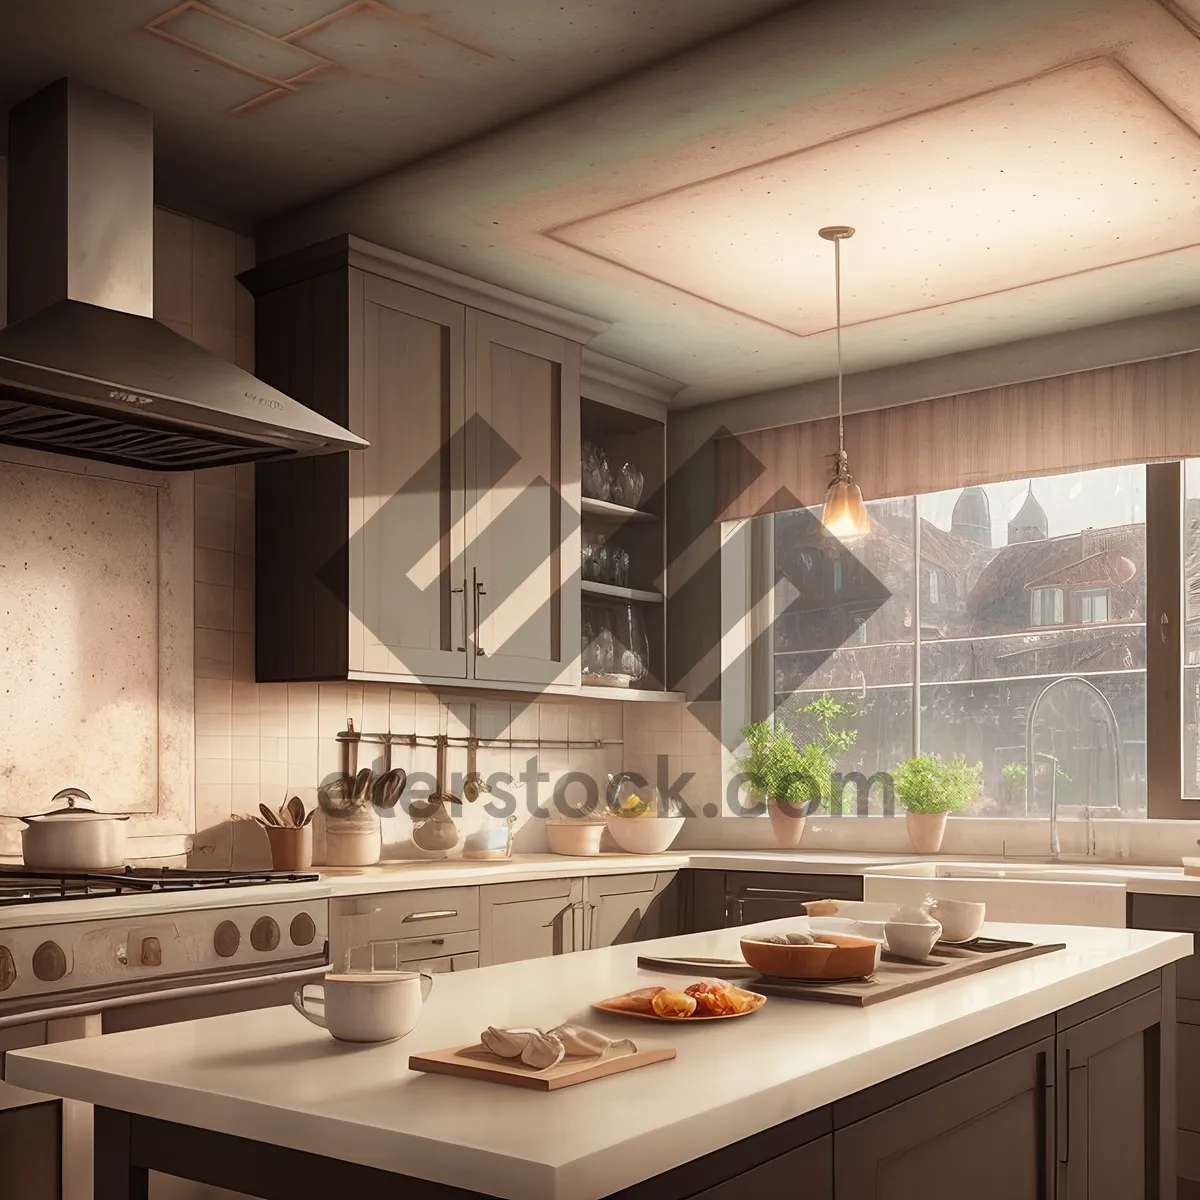 Picture of Сhic kitchen interior featuring trendy furniture, ample lighting, and fashionable accessories